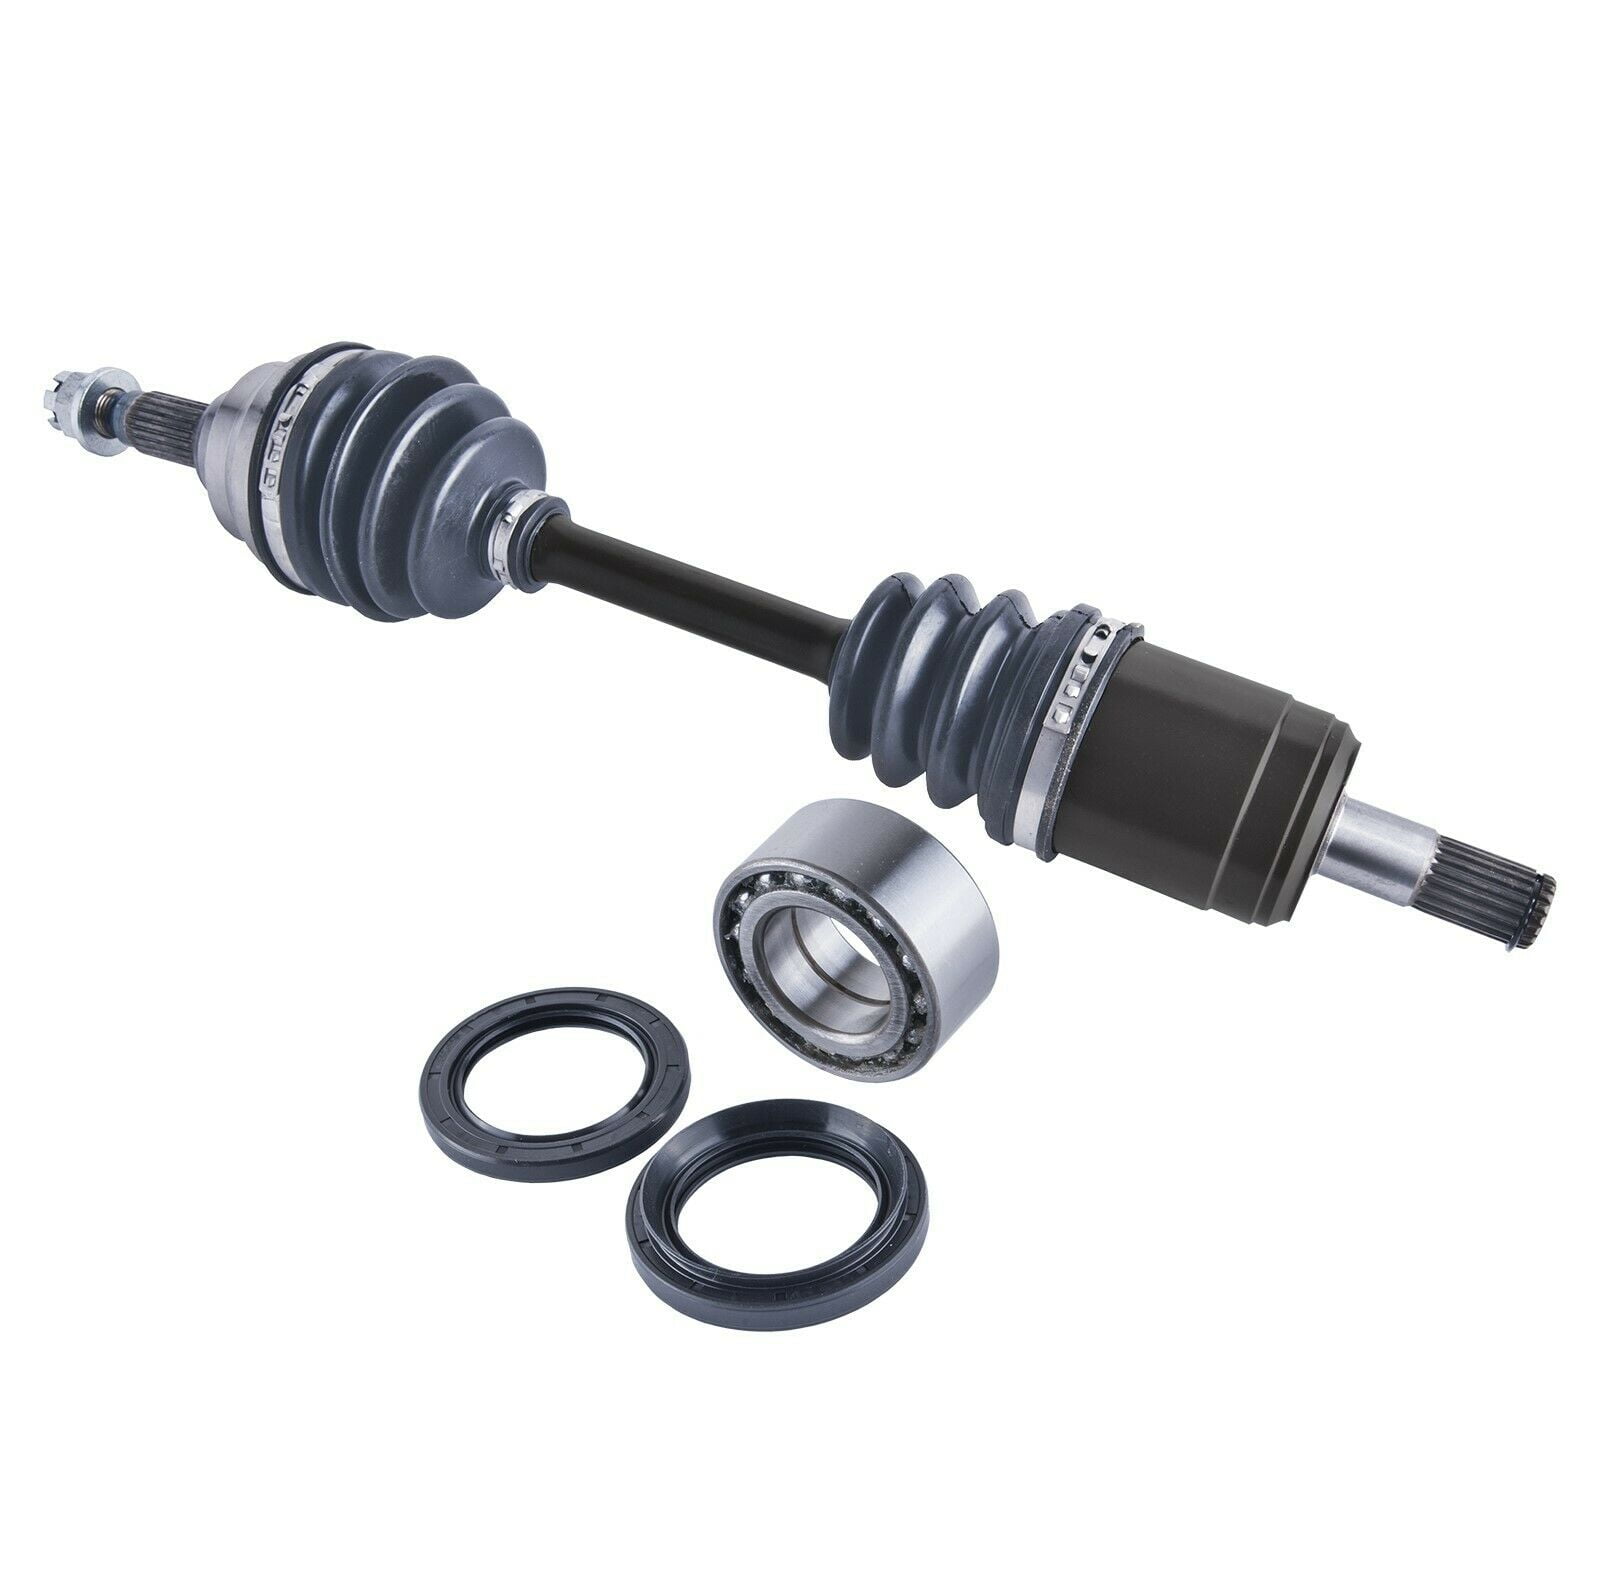 Caltric Front Right Complete Cv Joint Axle Compatible With Honda Trx400Fw Fourtrax Foreman 400 4X4 1995 1996 1997 1998 1999 2000 2001 